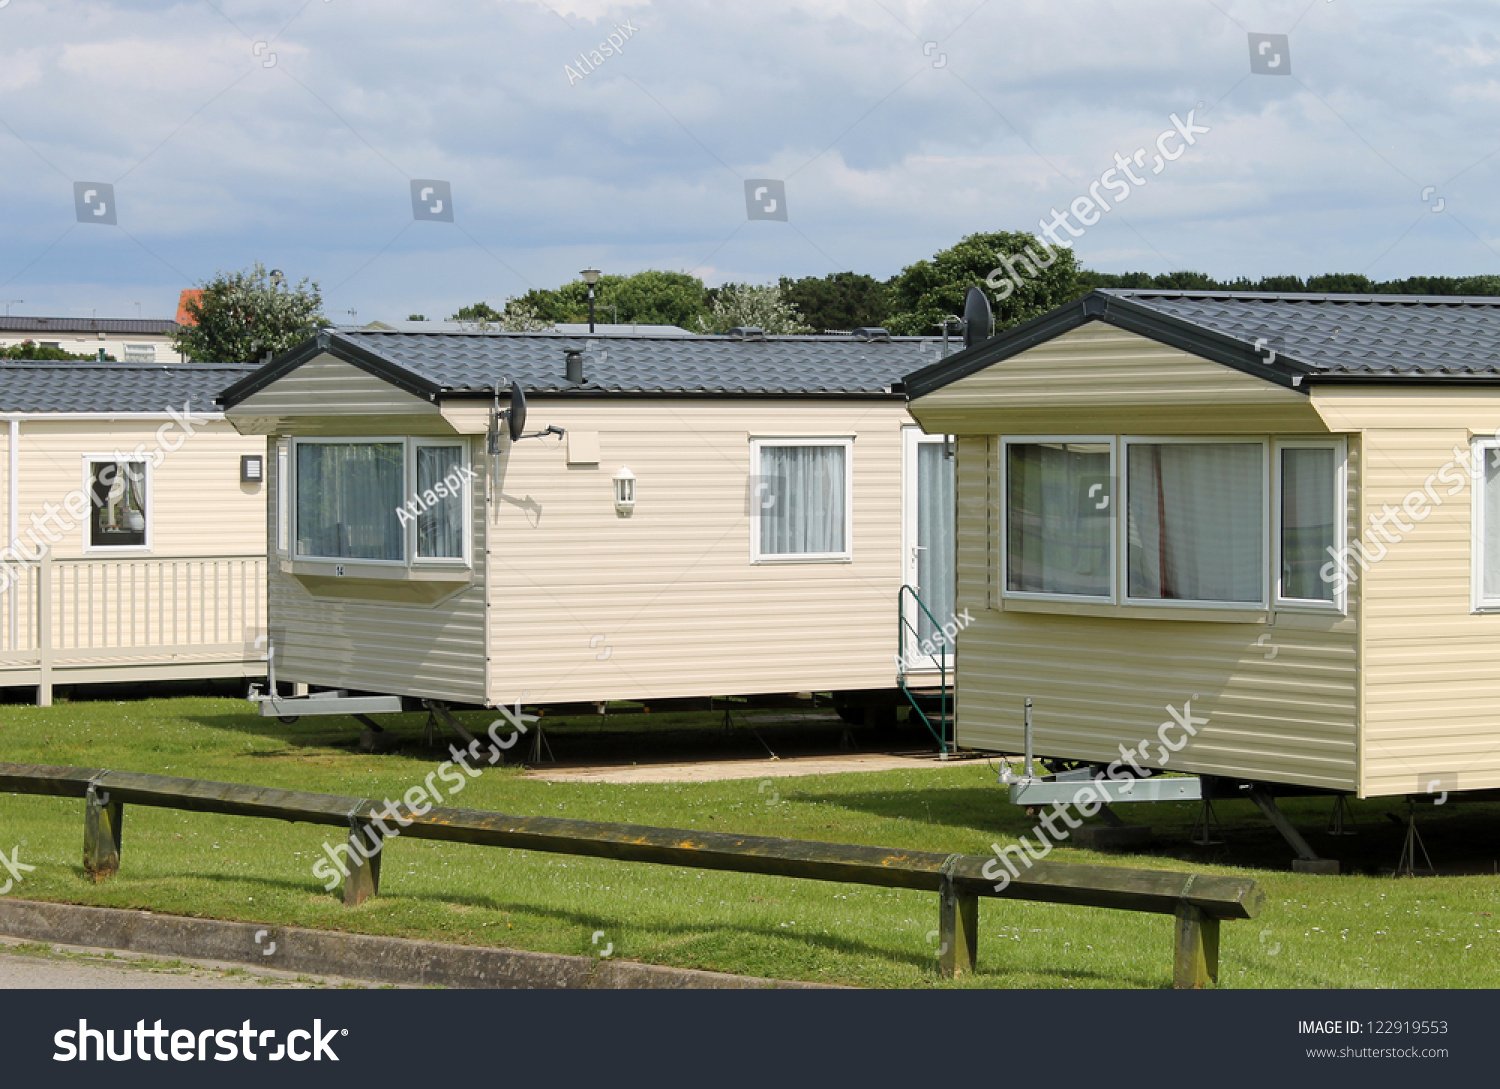 clipart mobile home - photo #38